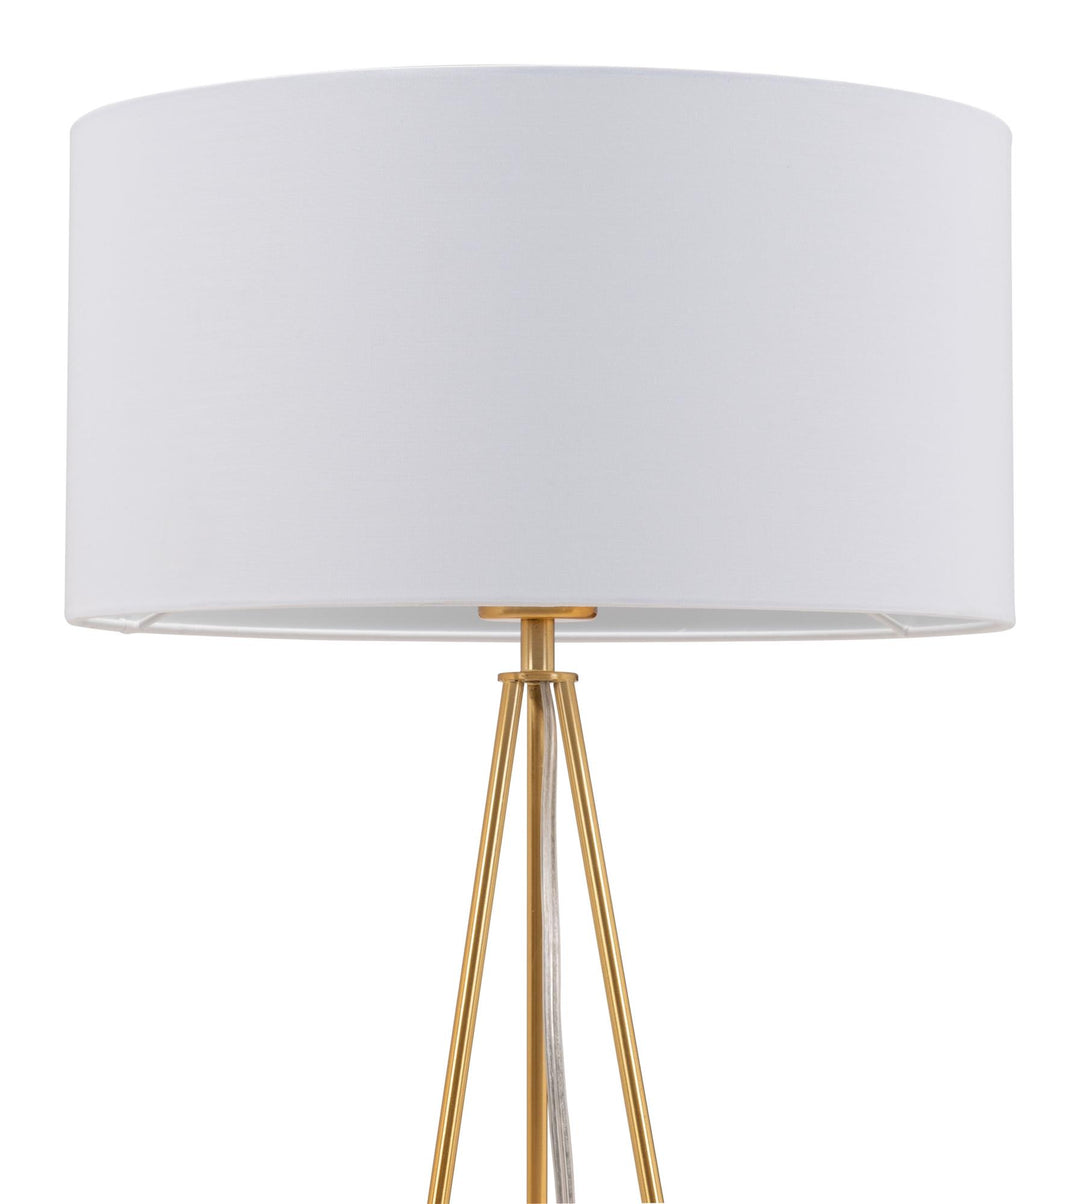 Siena's stylish lamp suitable for modern table settings -  N/A